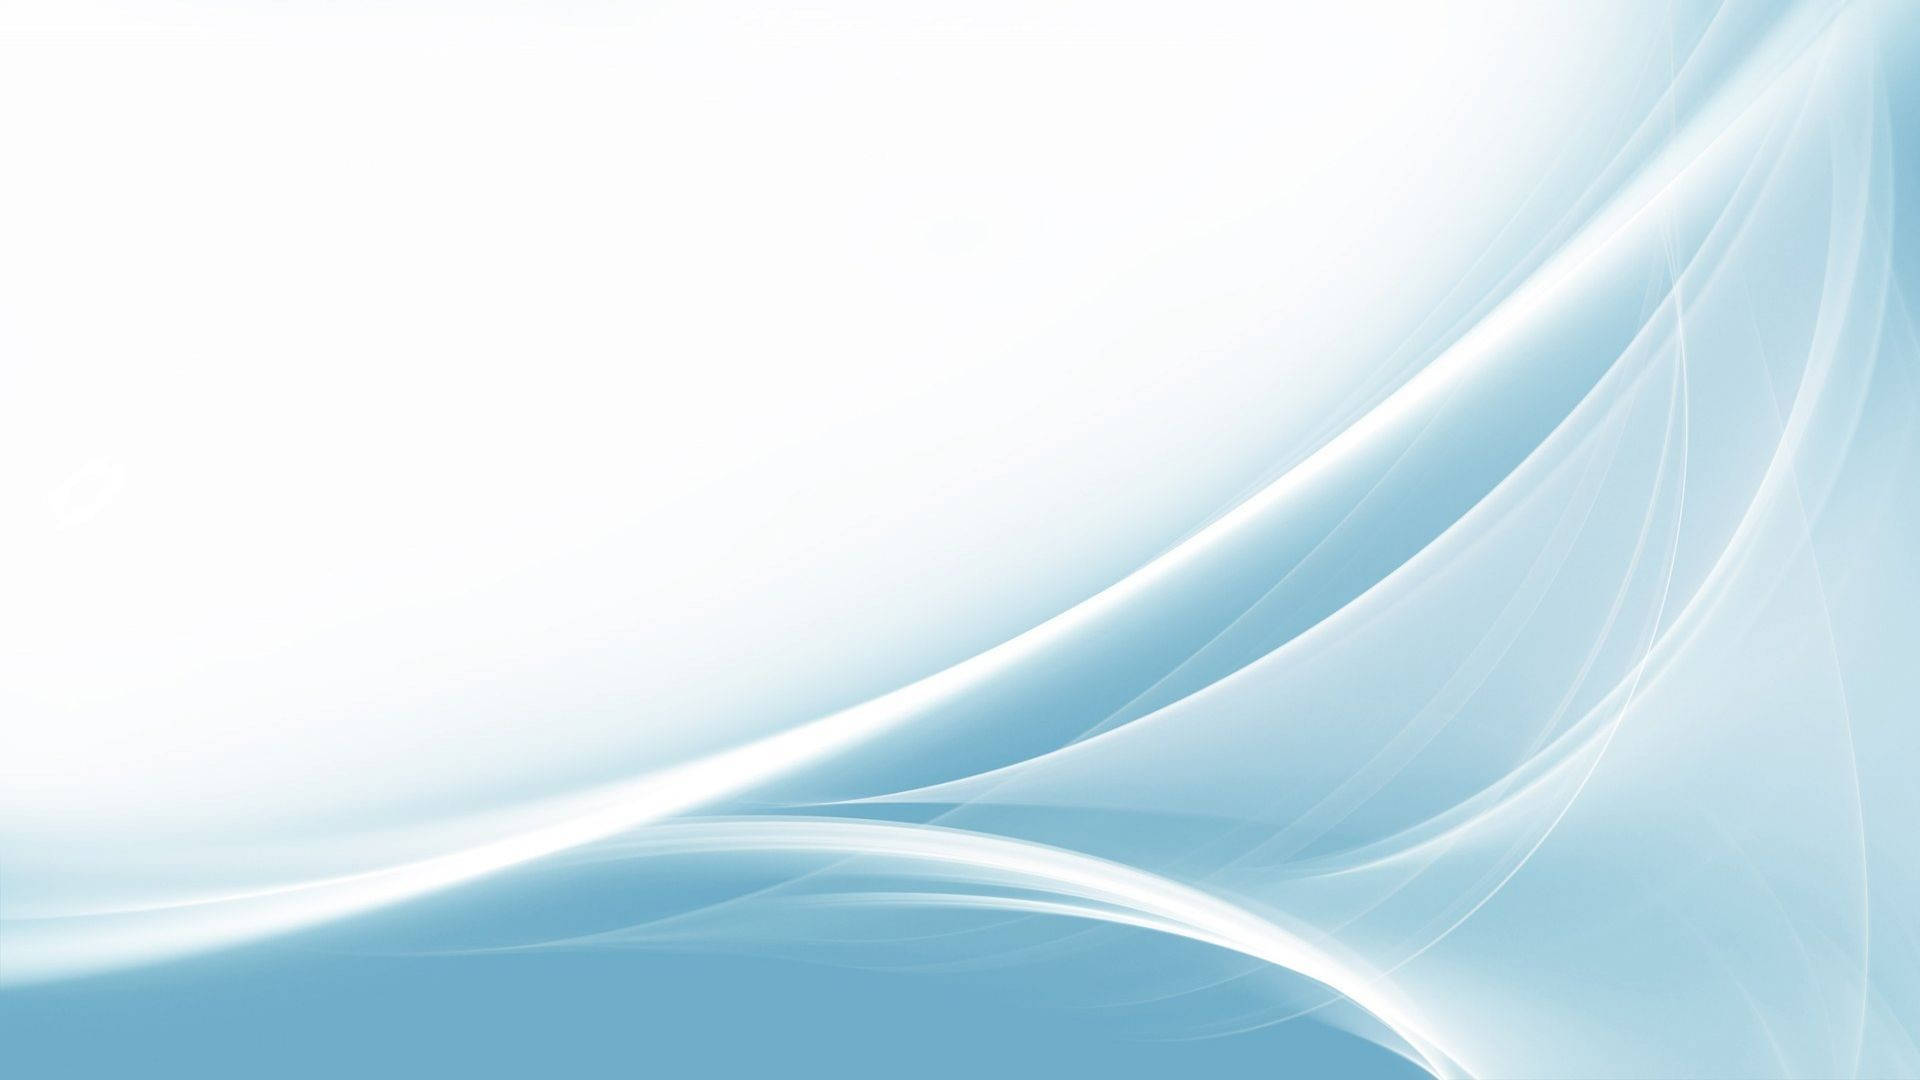 Blue And White Abstract Design Background